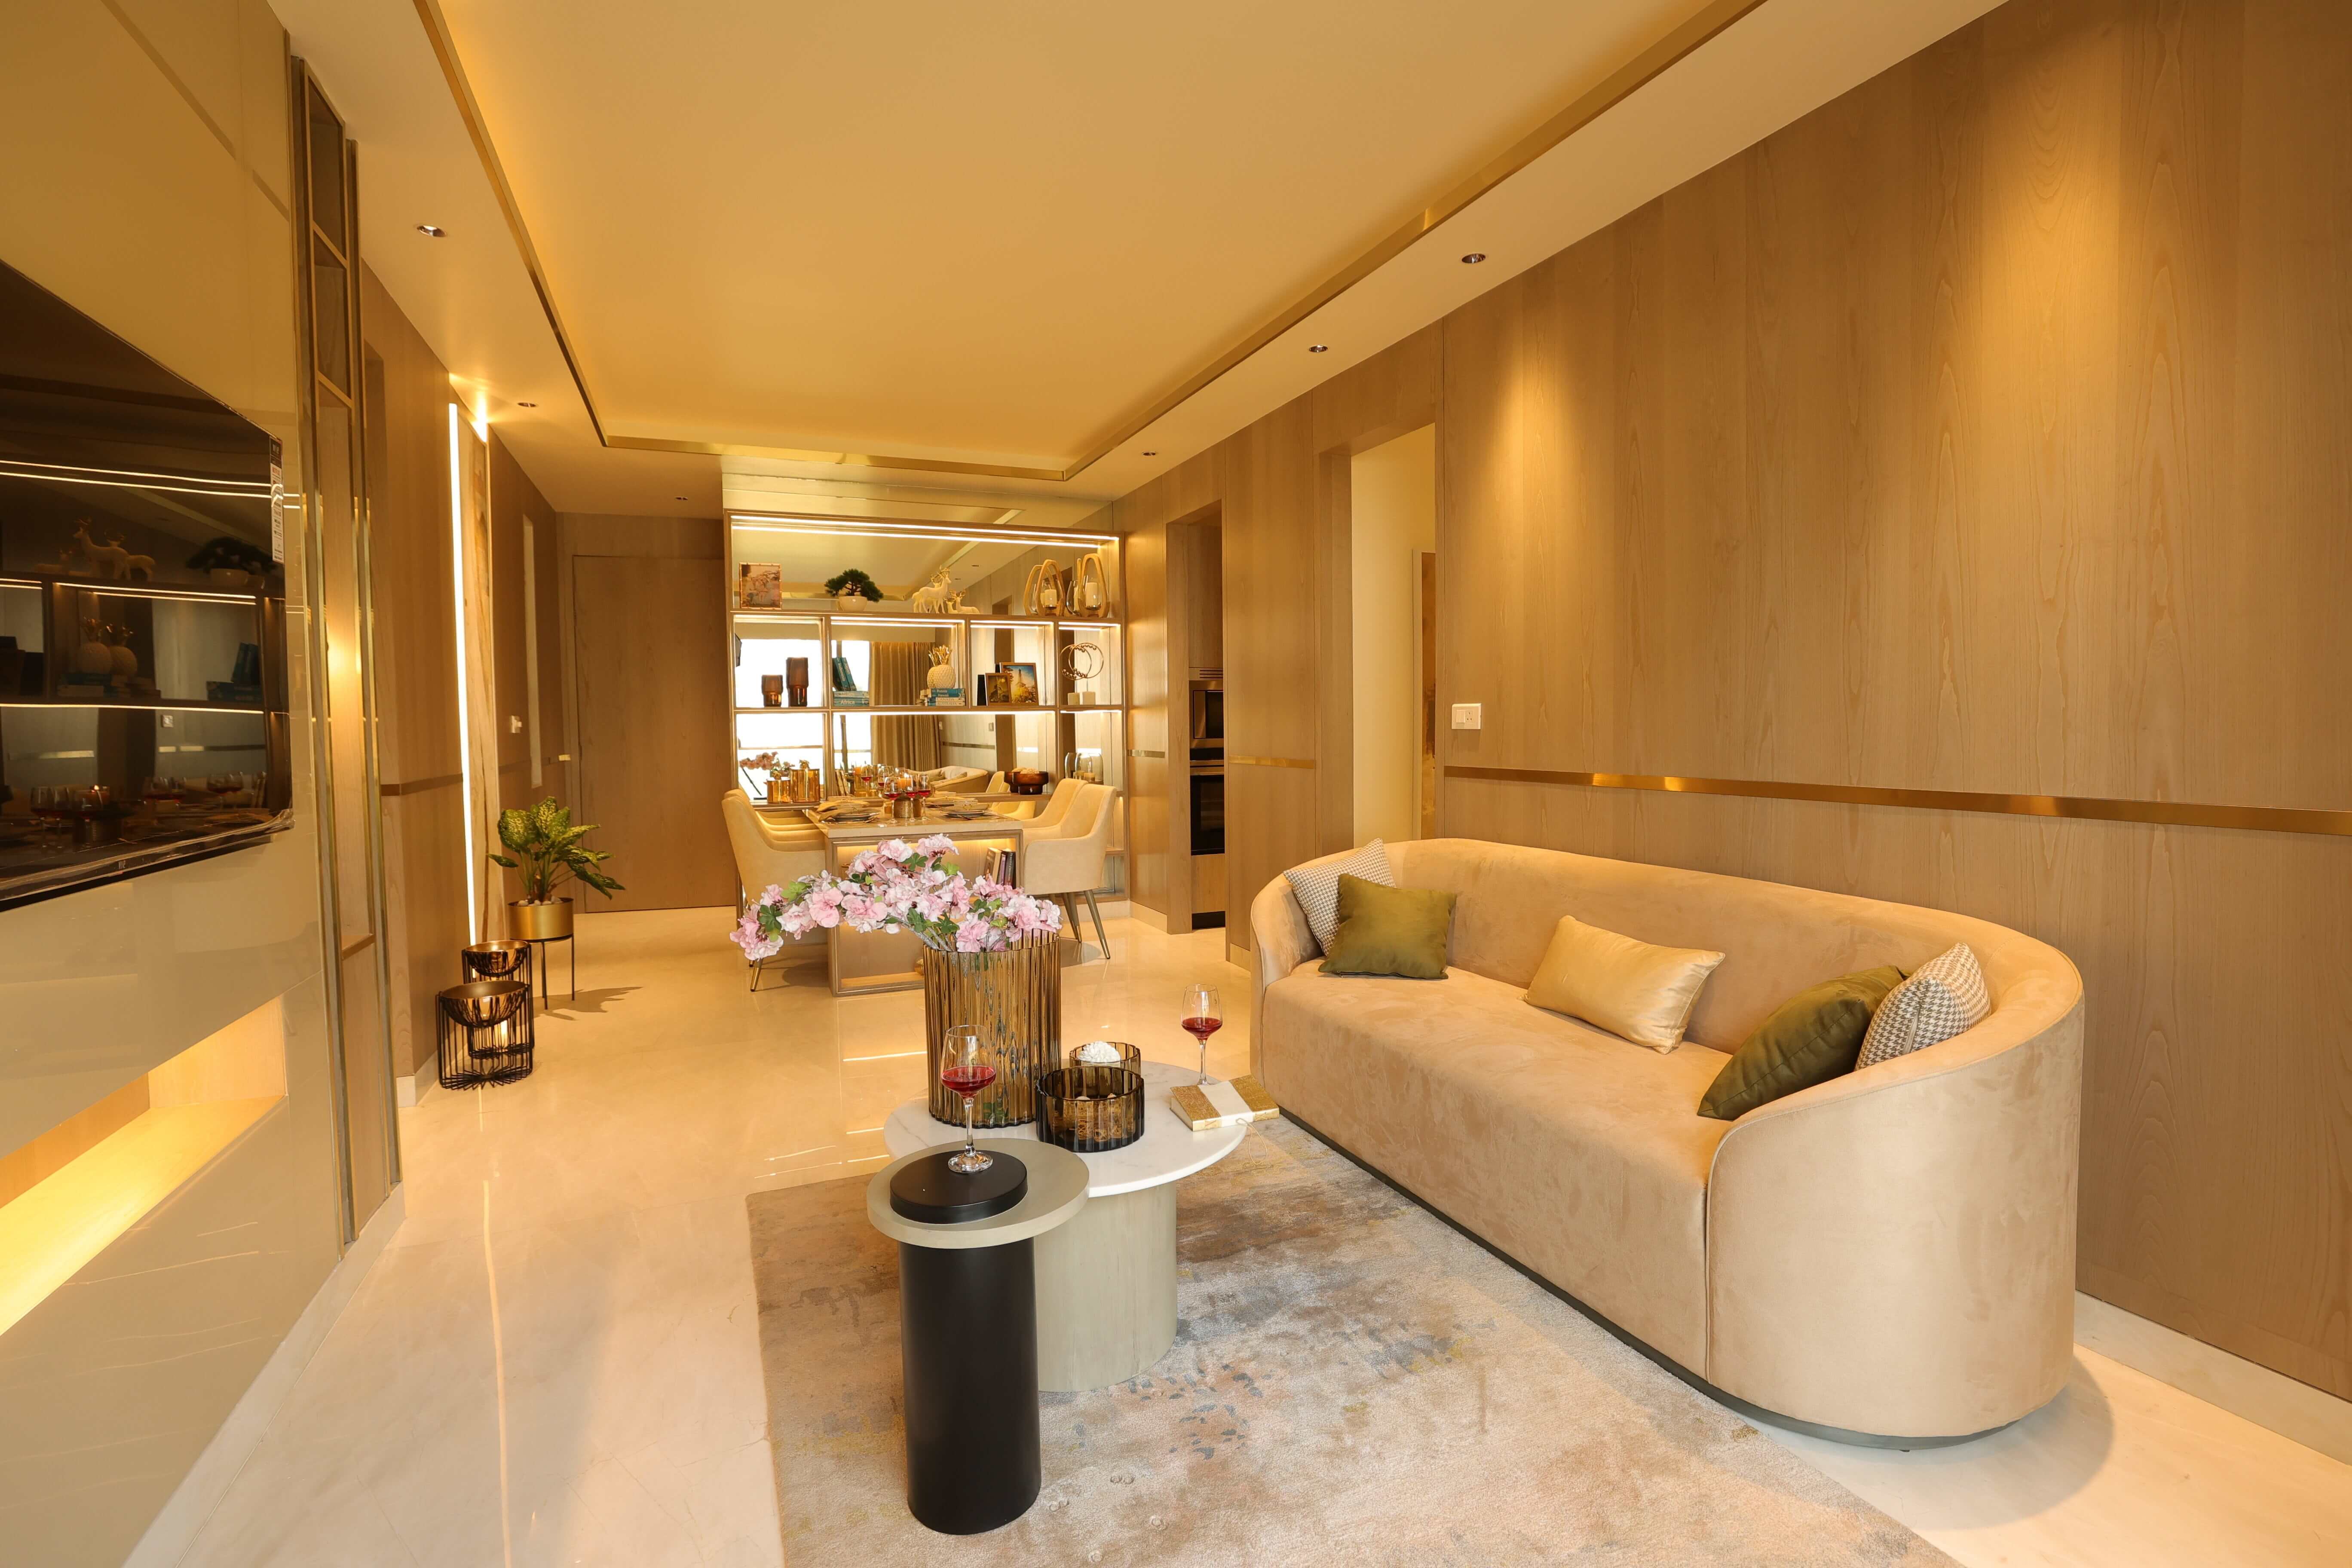 Reasons fueling the demand of luxury homes in Mumbai